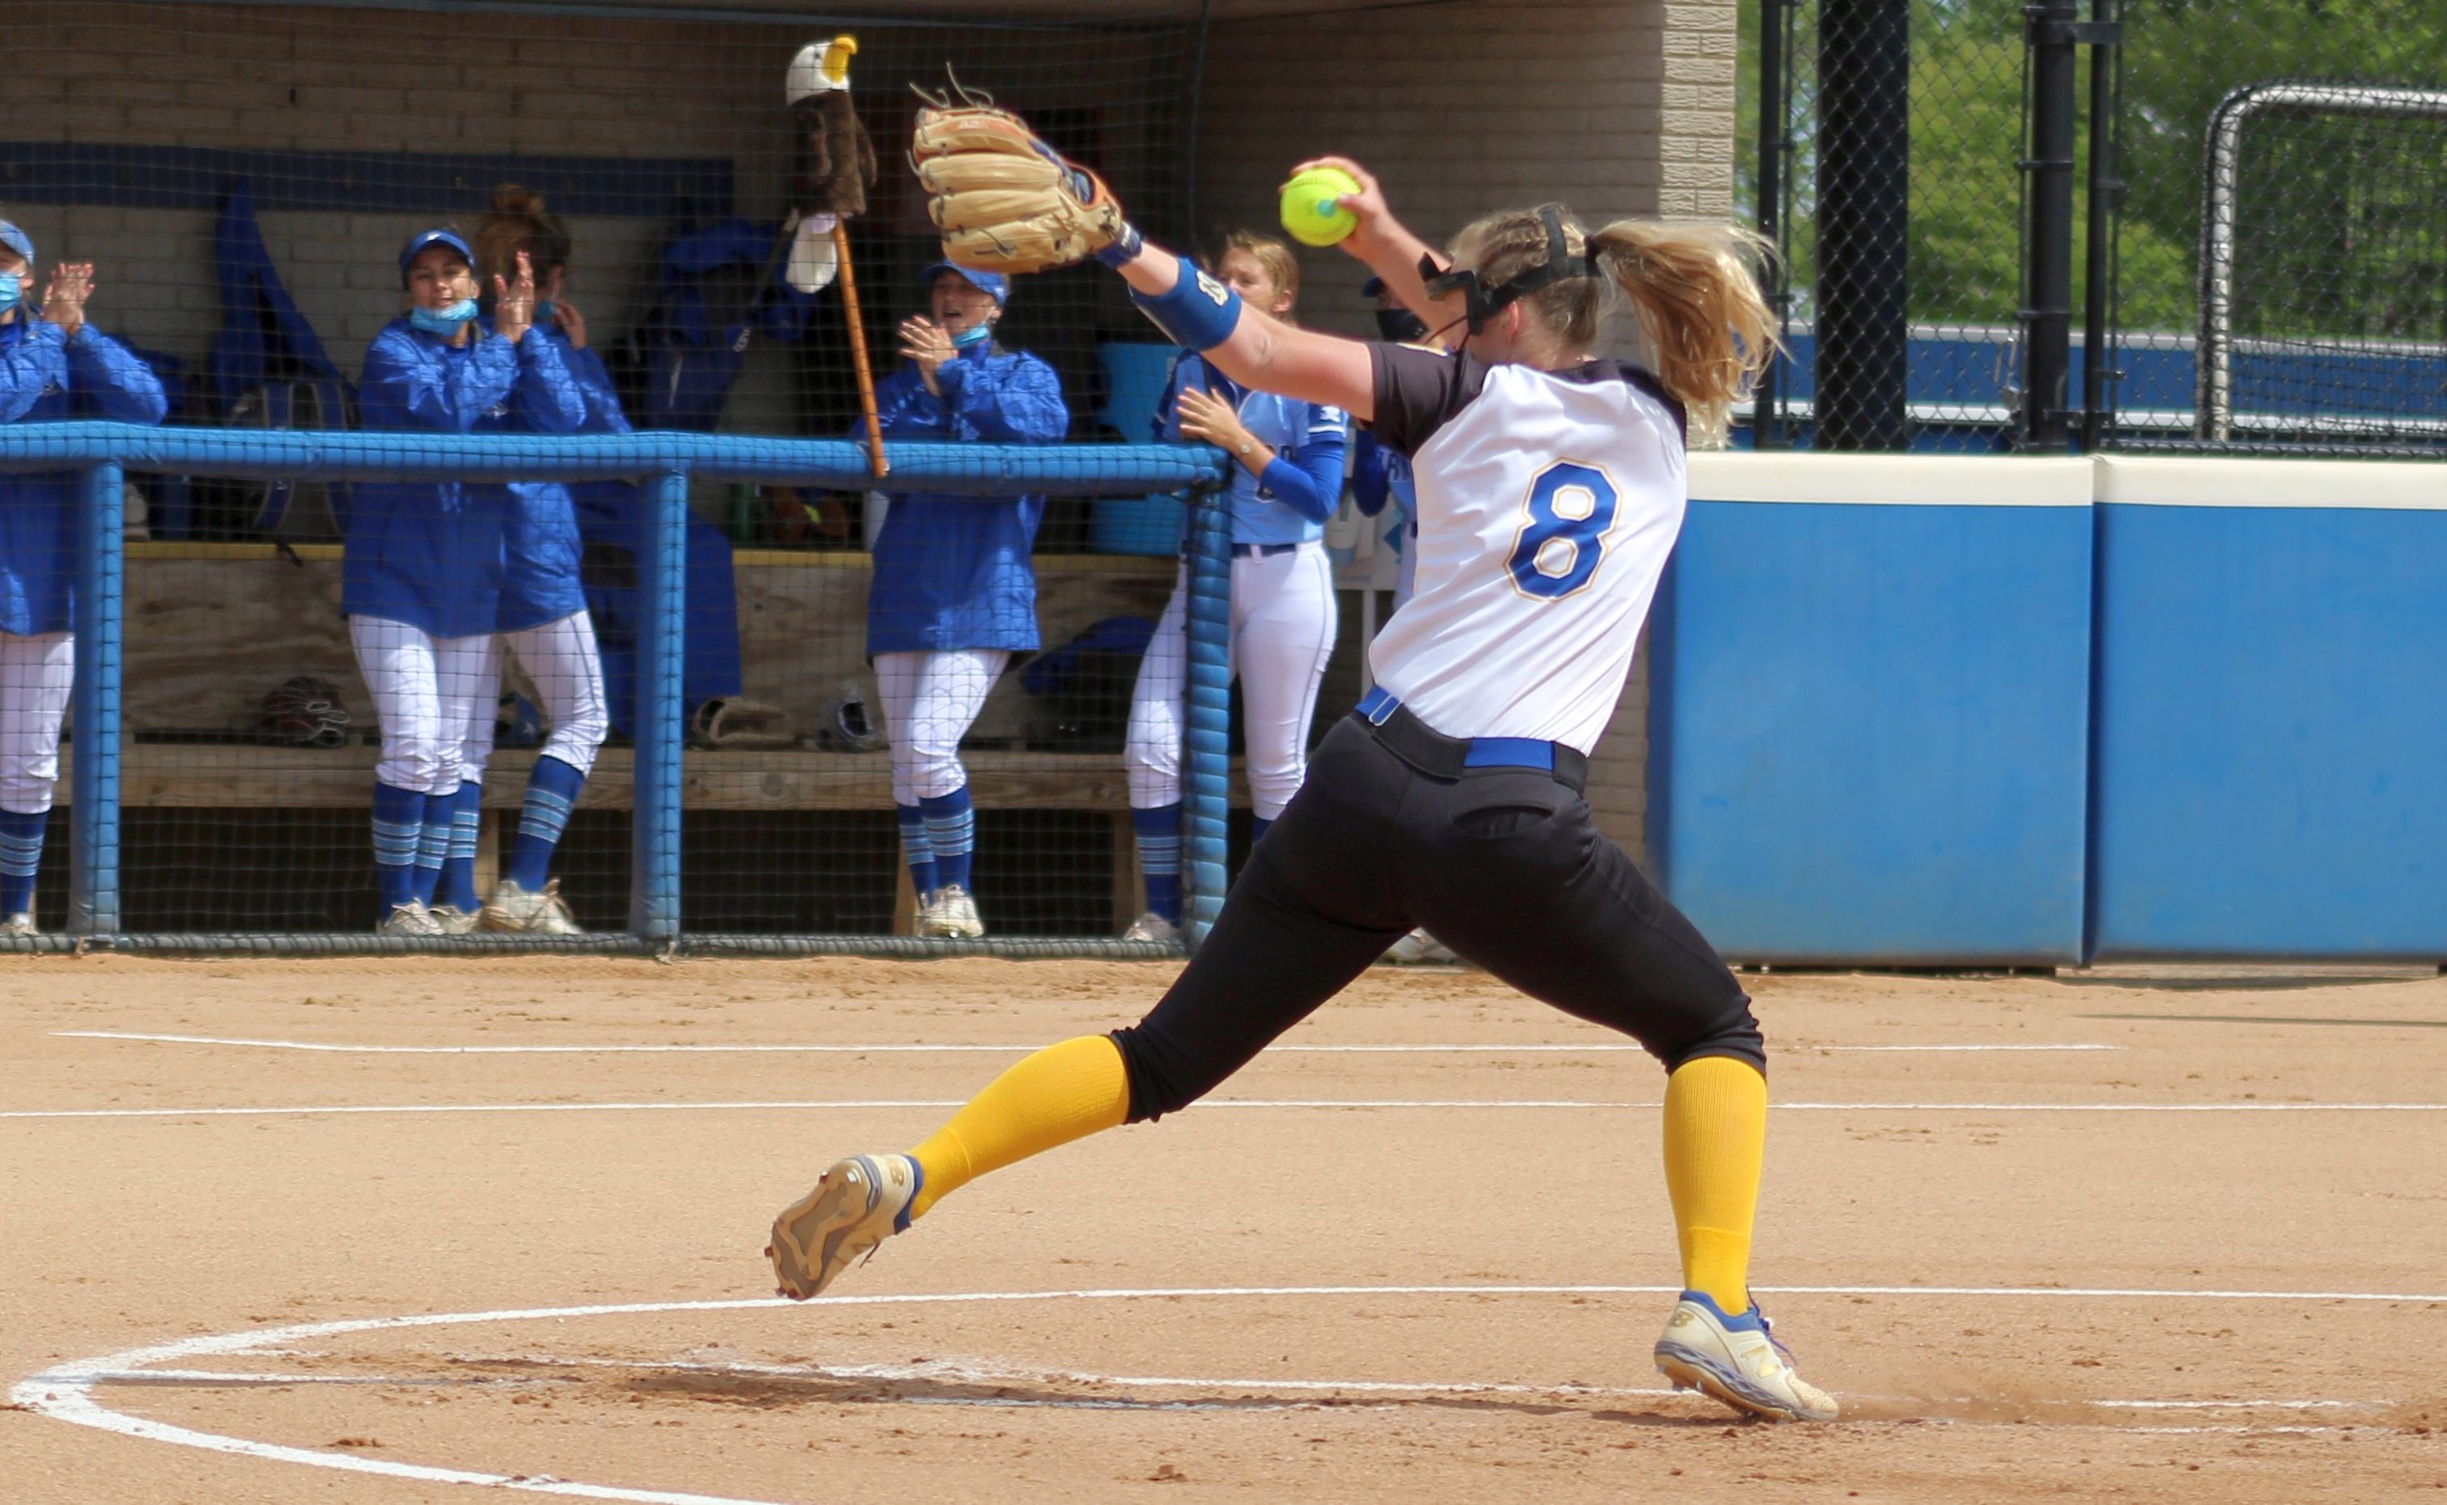 NIACC's Laken Lienhard earned first-team all-region honors as a utility player.